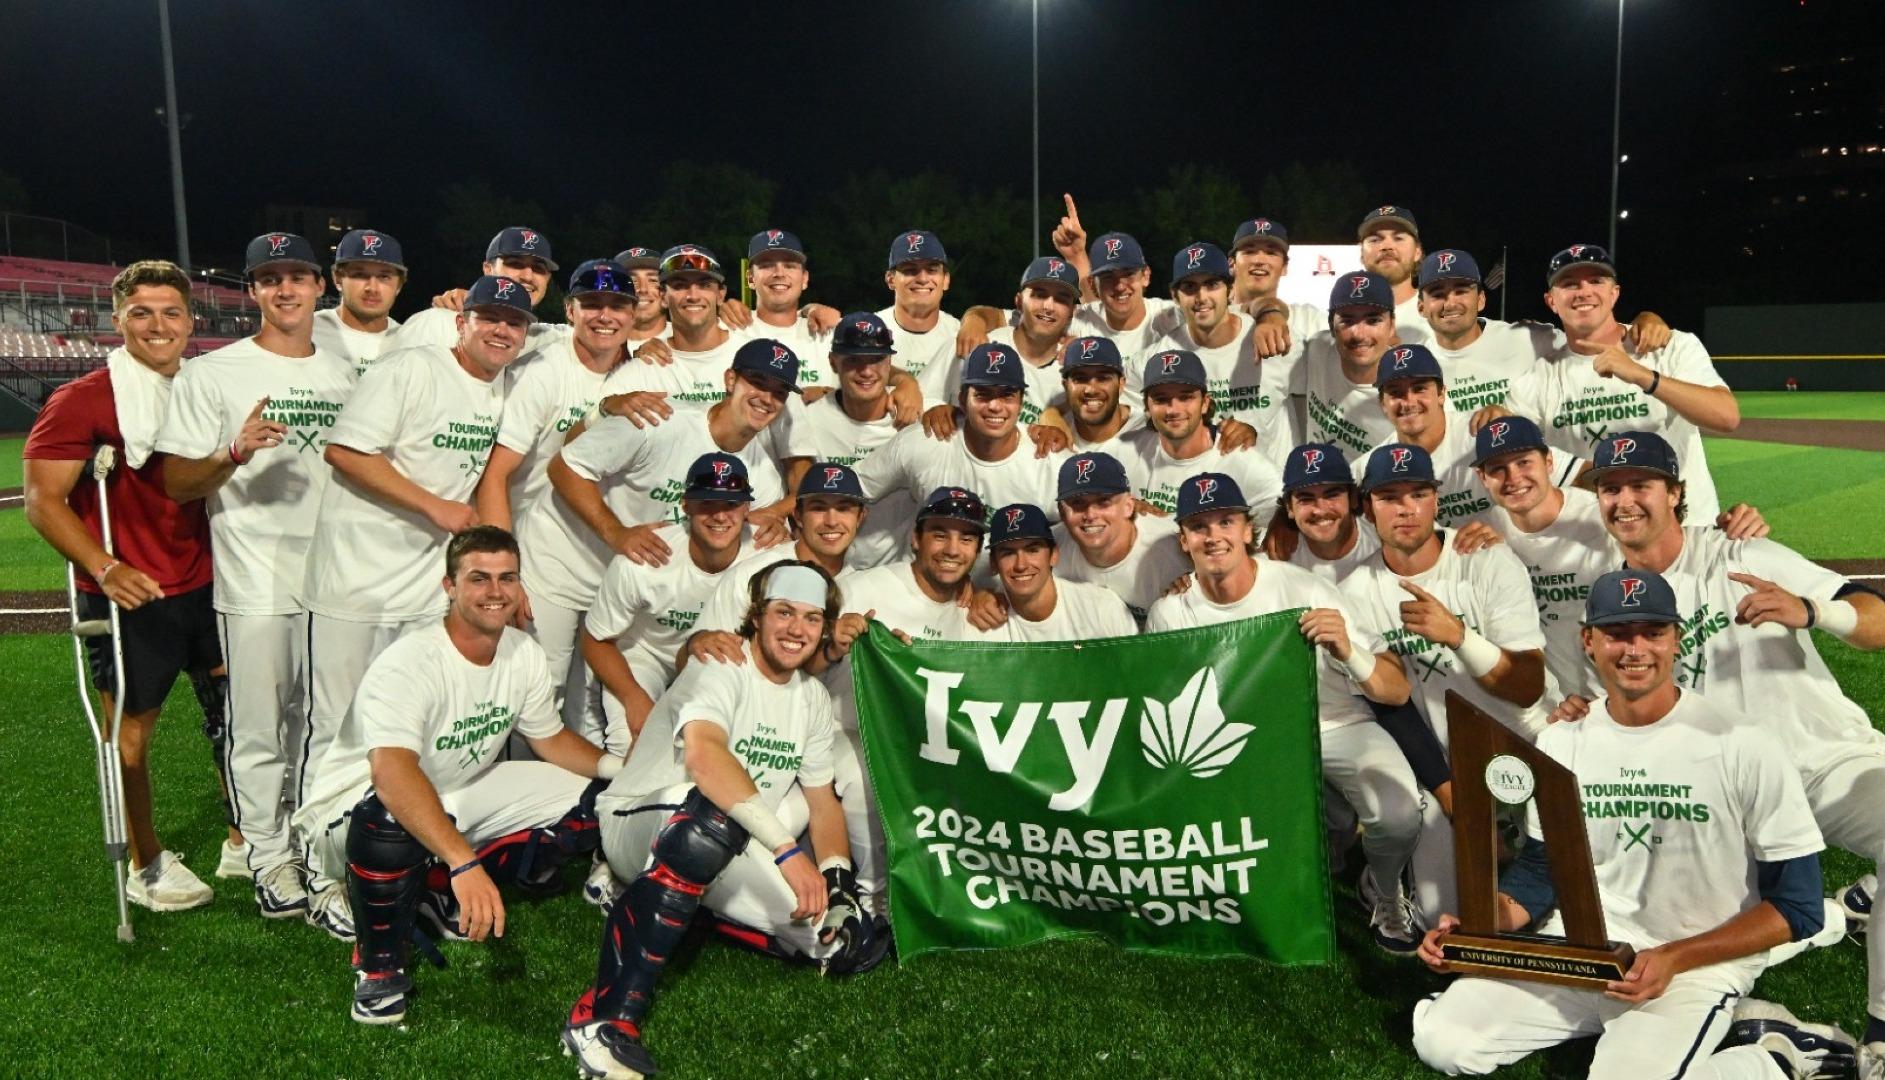 Members of the baseball team pose with the Ivy Tournament championship banner.